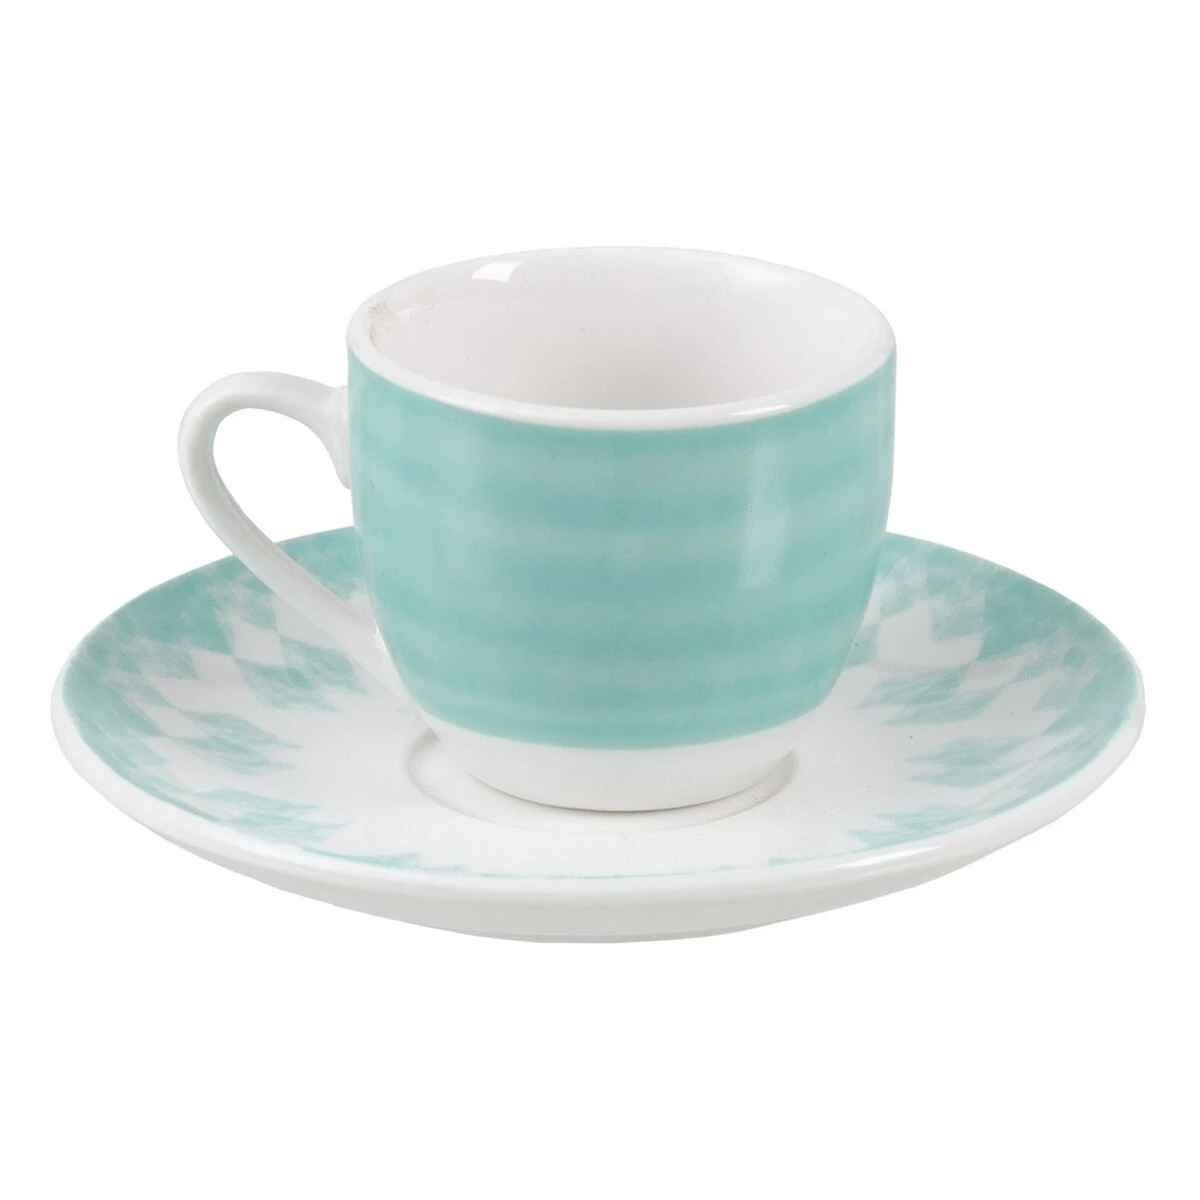 Light blue cup and saucer